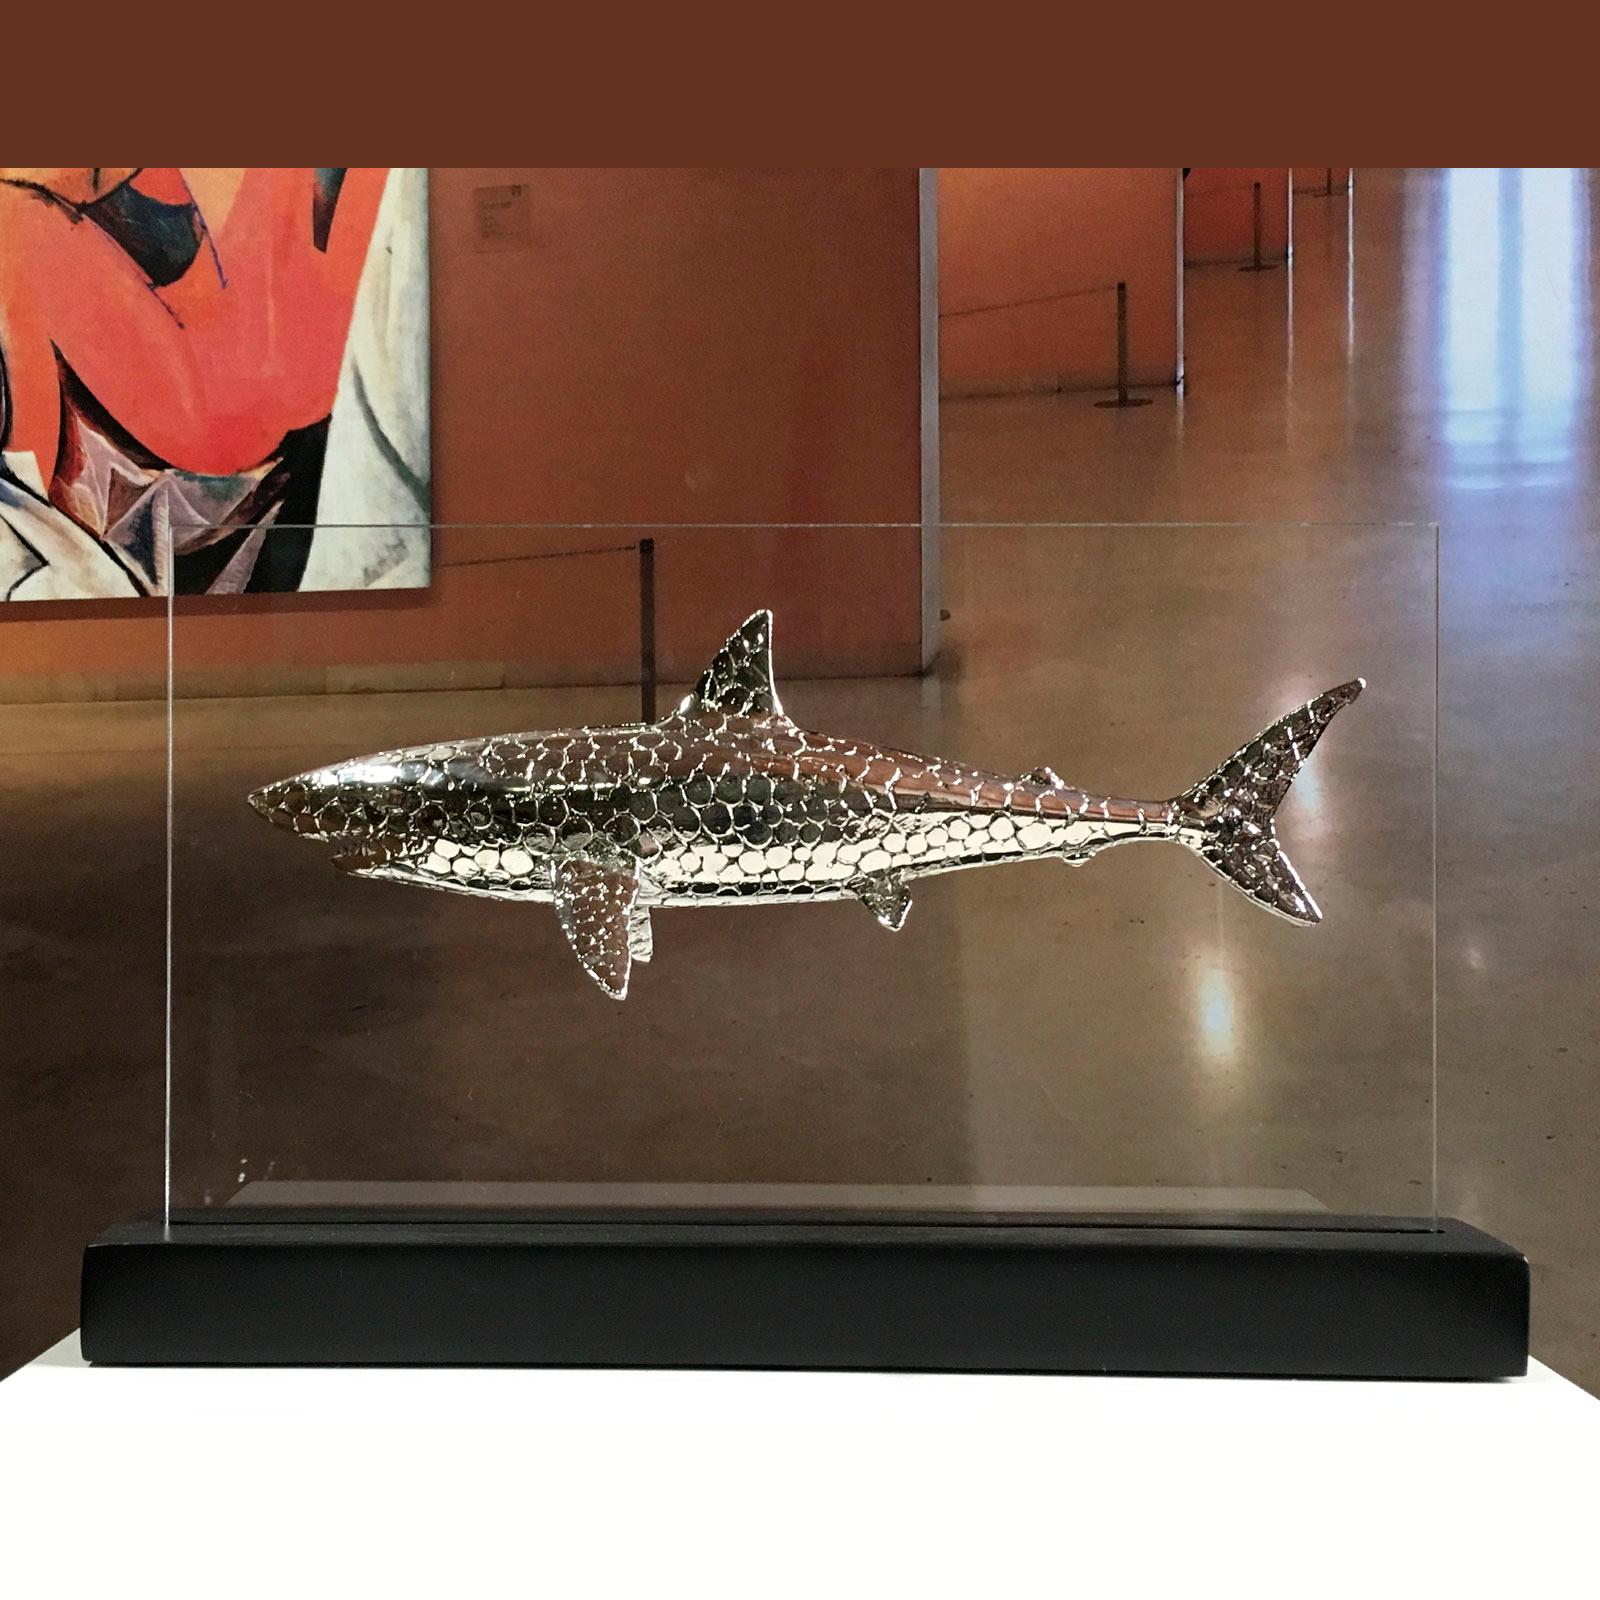 Pop Art Sculpture "Deep evolution" by Miguel Guía.
The sculpture is made of a layer of nickel on cold smelting of copper with the base of graphite or marble dust.
Limited edition of 150 works.
Although the required time to deliver a shipment is